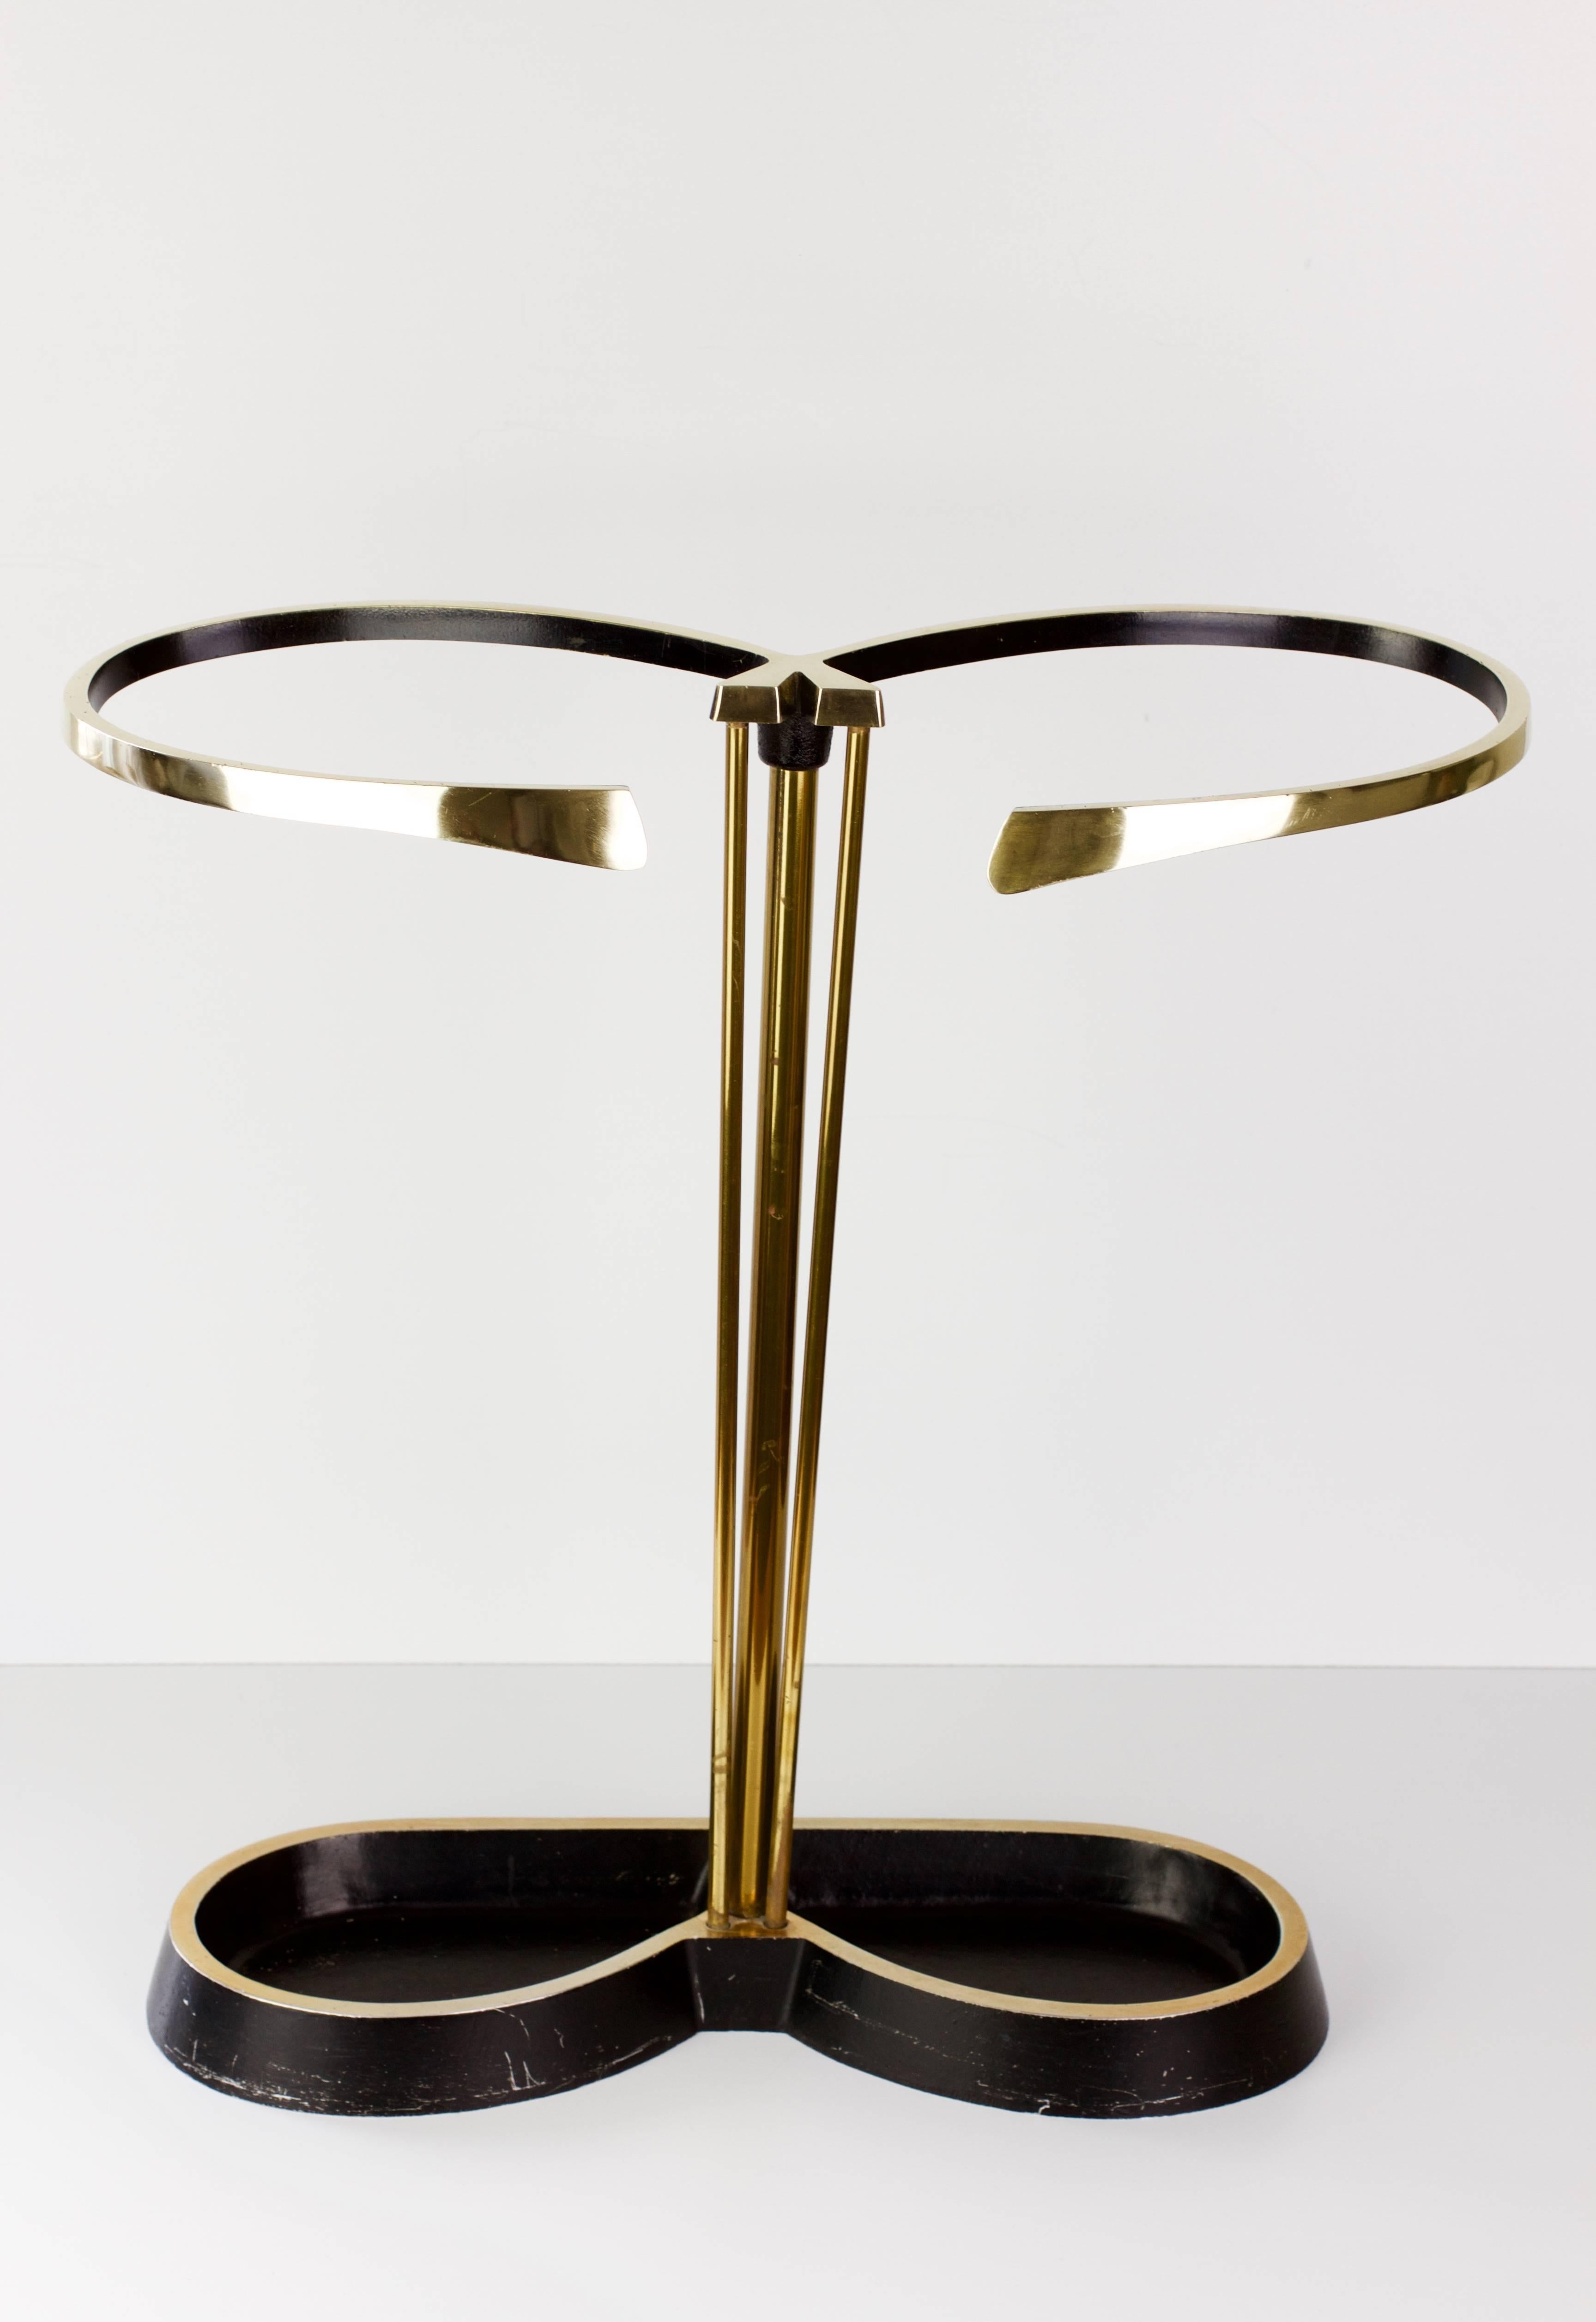 A beautiful, vintage Mid-Century Modern black and gold umbrella stand attributed to Austrian Designer Carl Auböck, Vienna, circa 1950. Both whimsical and Modernist, the stand features a heavy cast iron base with polished solid brass rods and holder